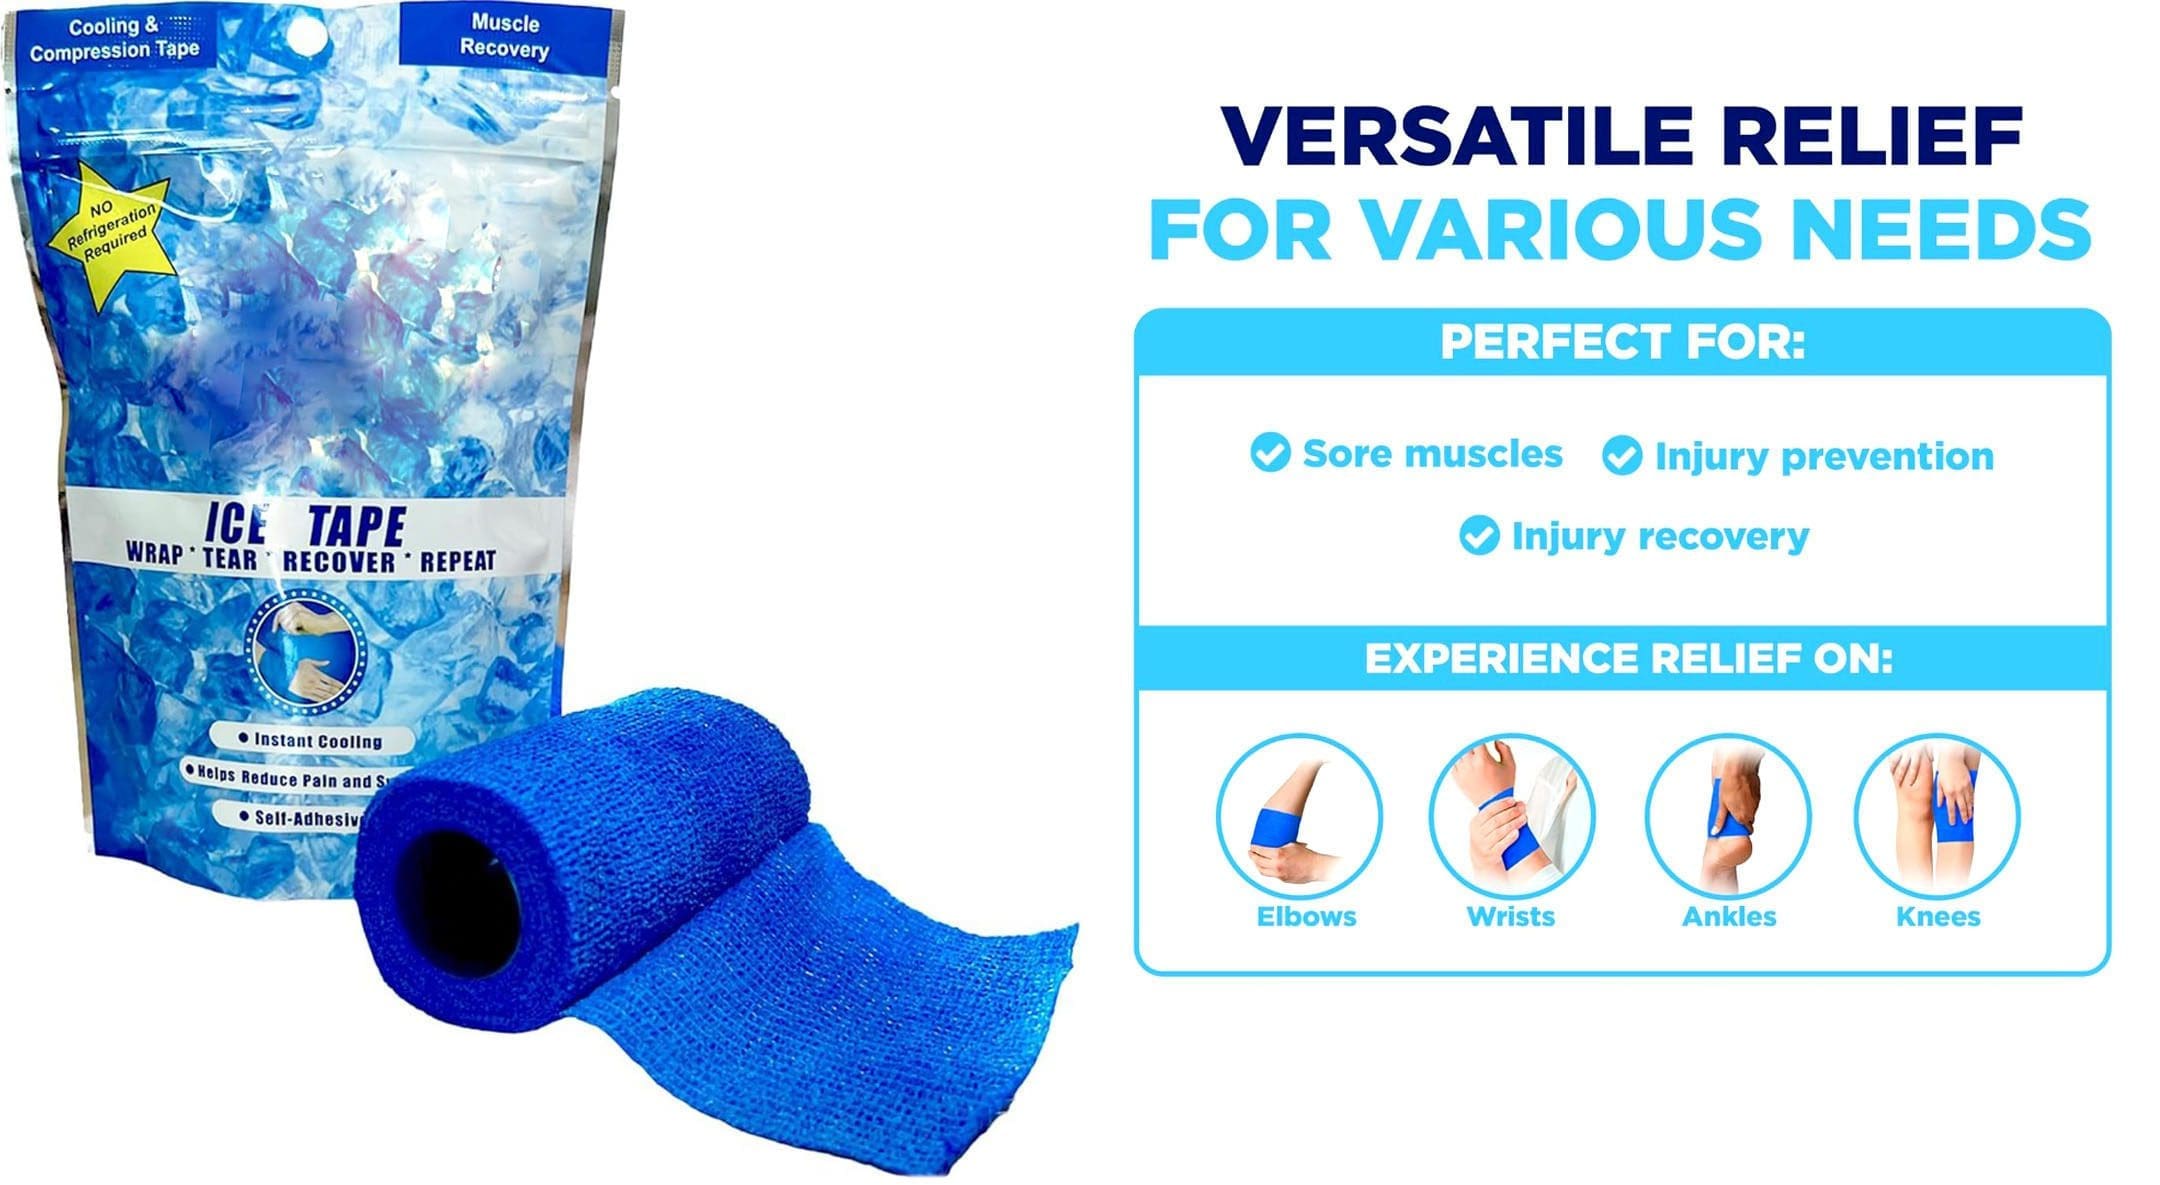 Cold Therapy with Ice Tape for Musculoskeletal Injuries